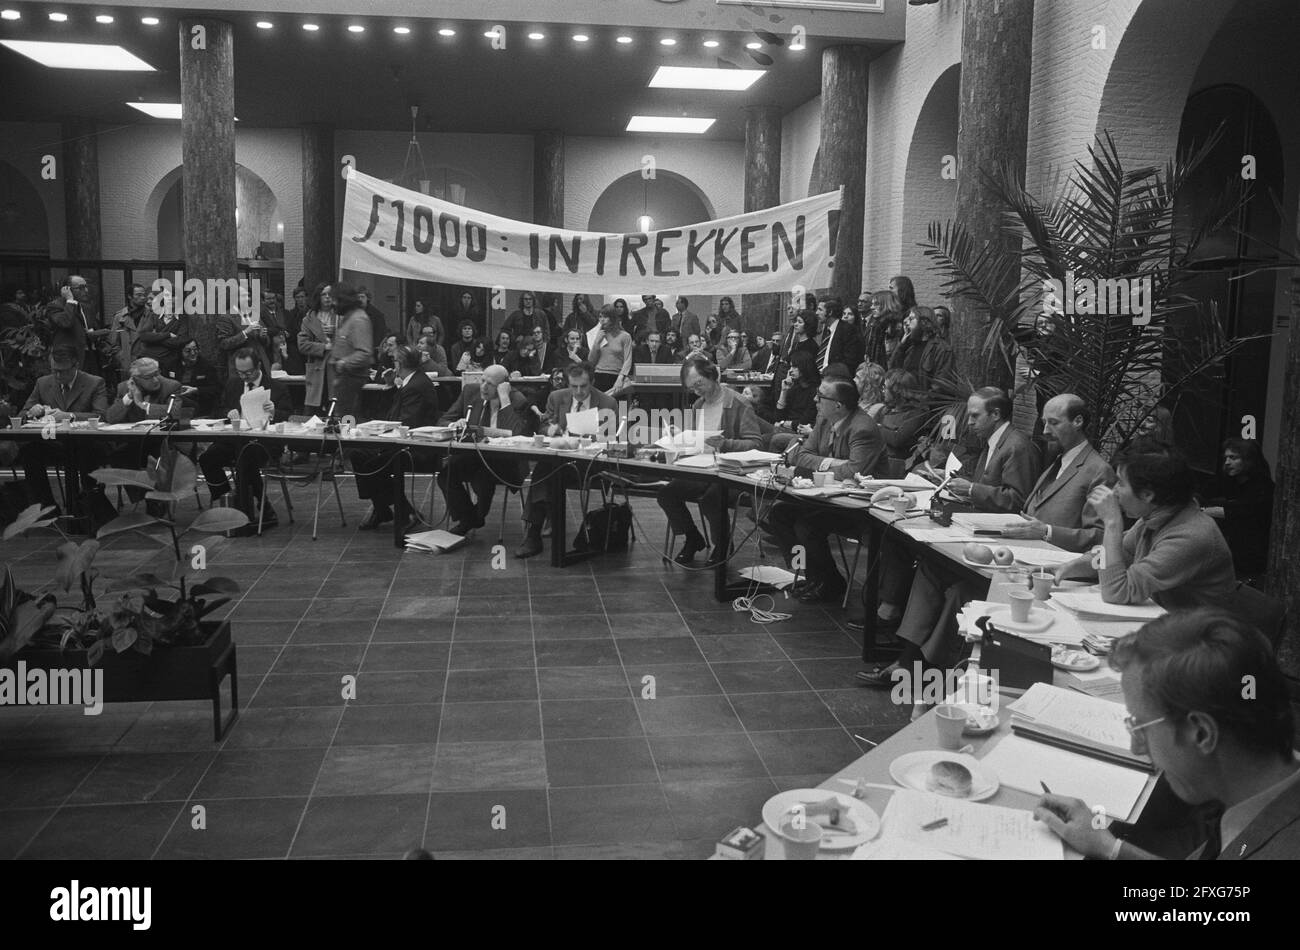 Meeting University Council of G.U. Amsterdam in Maagdenhuis attended by occupiers of registration desk, 20 February 1973, Registration Offices, Meetings, Occupations, The Netherlands, 20th century press agency photo, news to remember, documentary, historic photography 1945-1990, visual stories, human history of the Twentieth Century, capturing moments in time Stock Photo